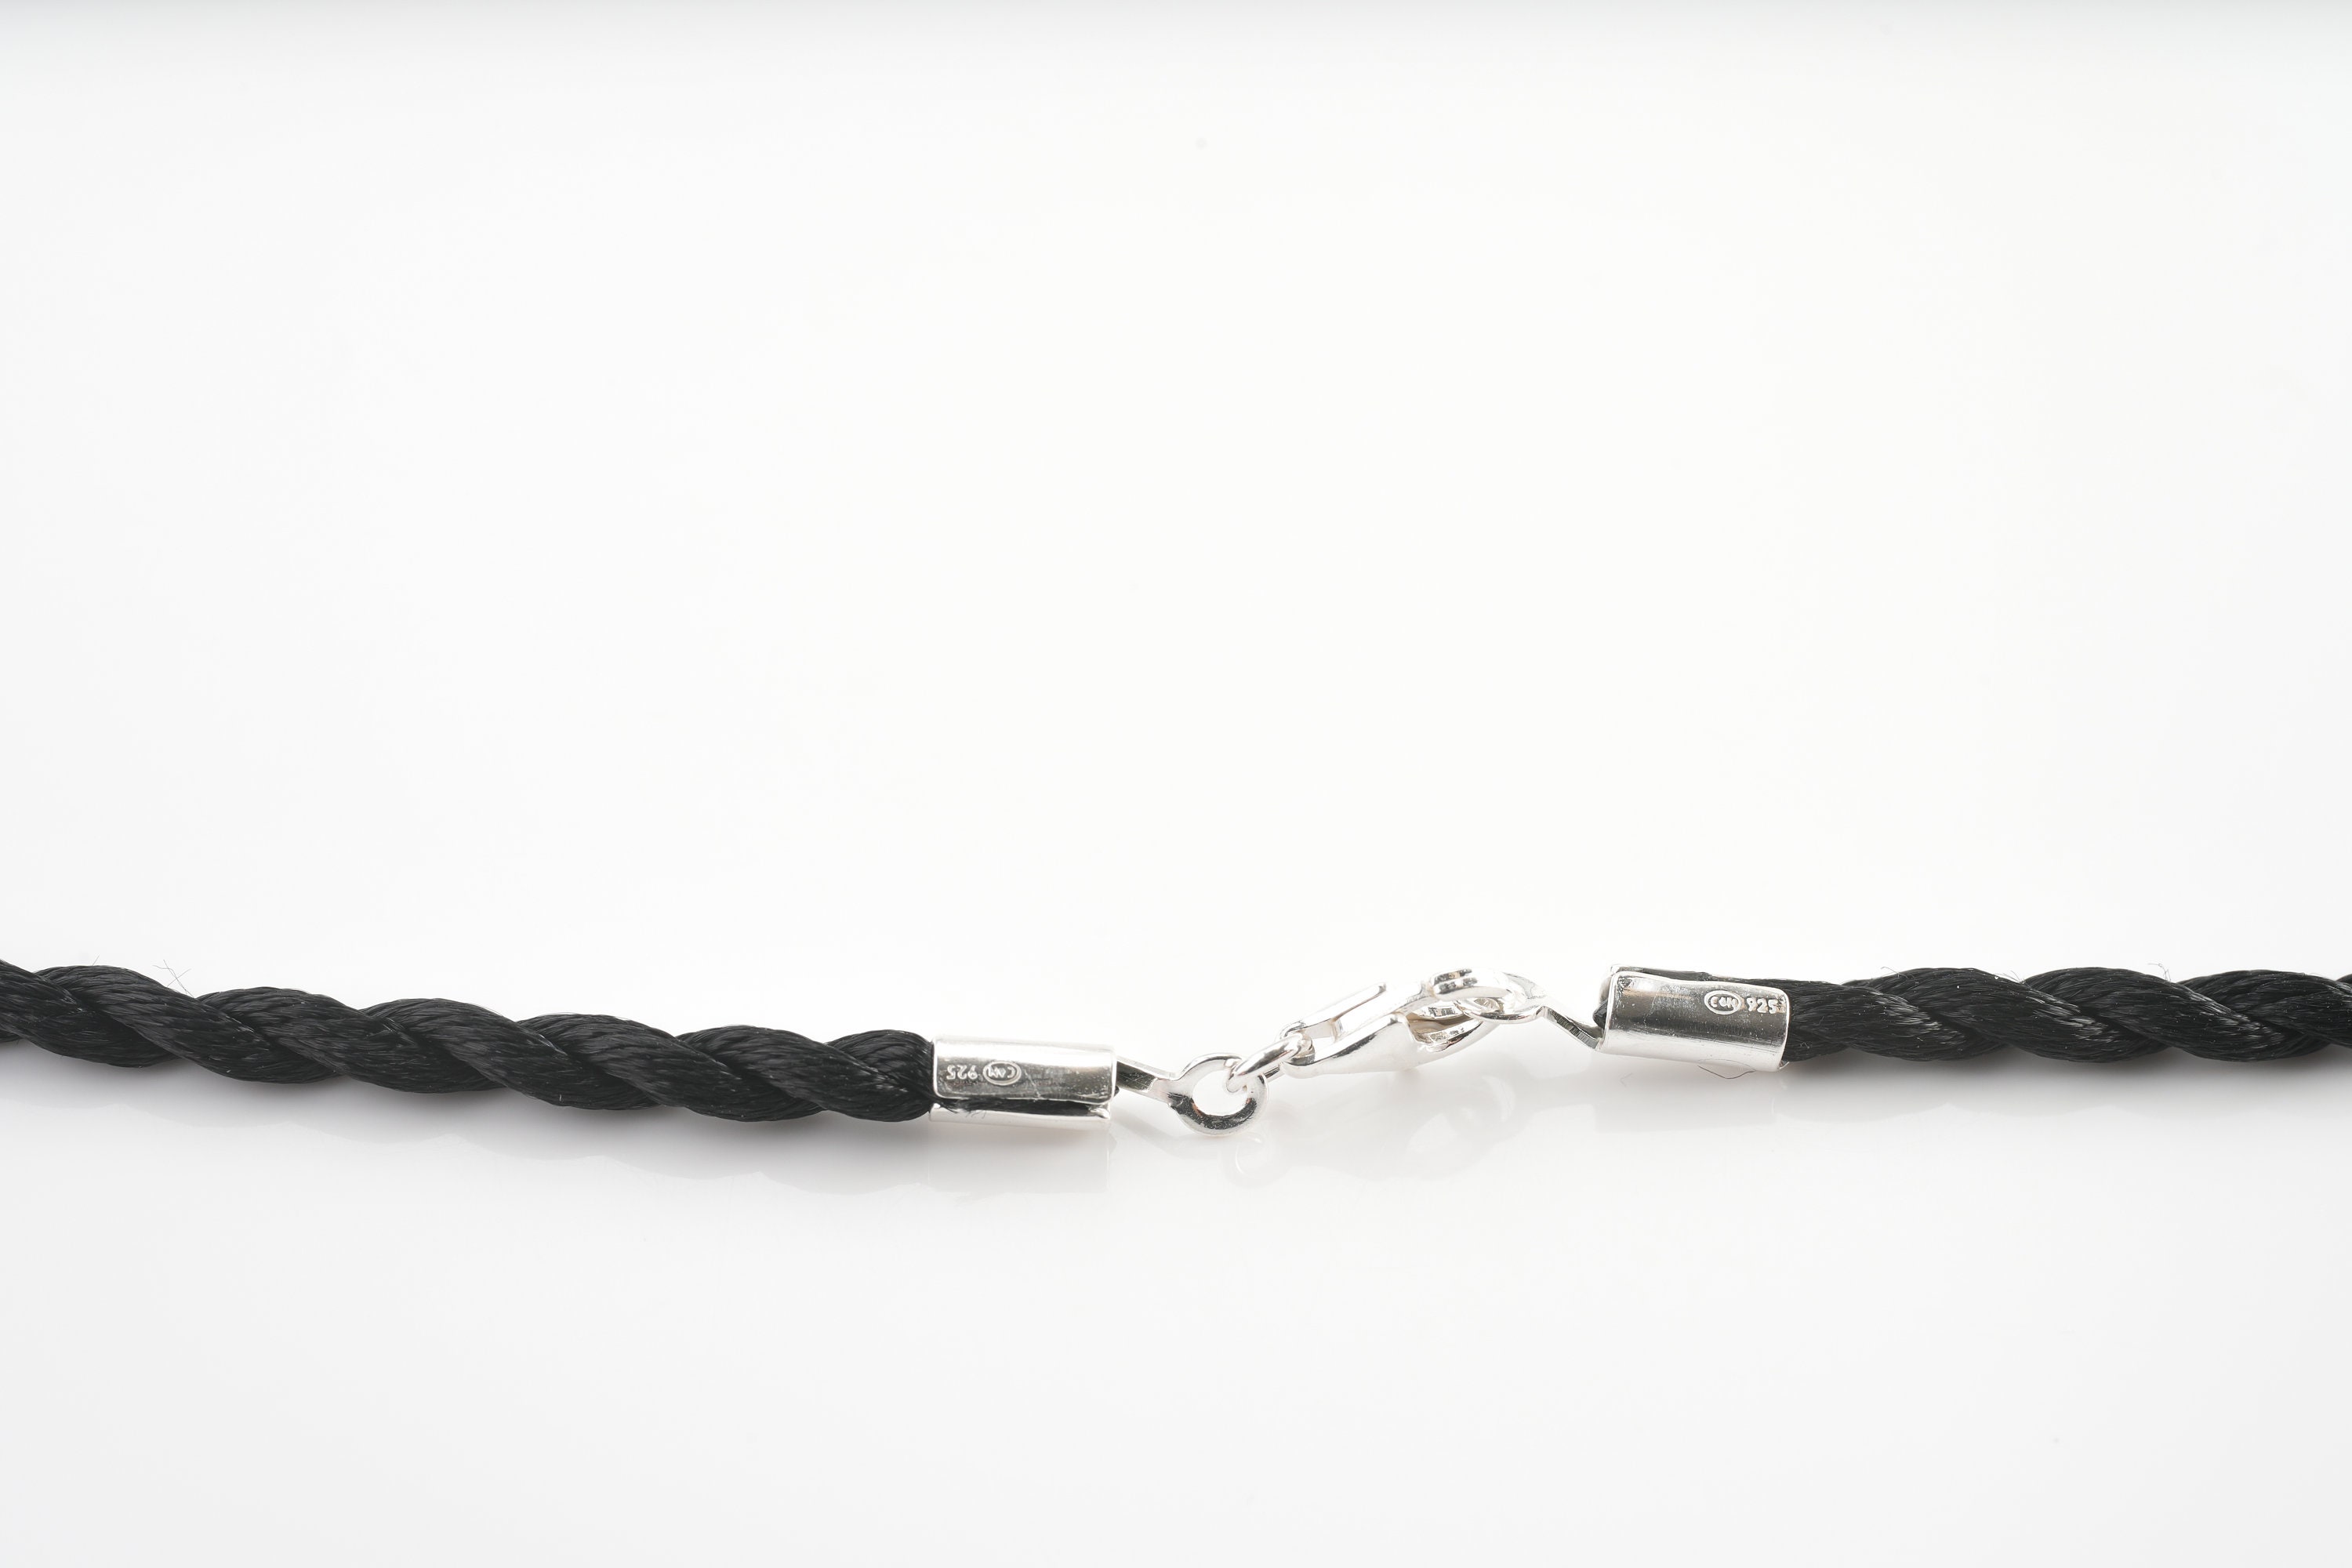 Black Leather Twisted Braided Shungite Pendant Chain For Women Drop  Delivery Jewelry From Bdegarden, $0.09